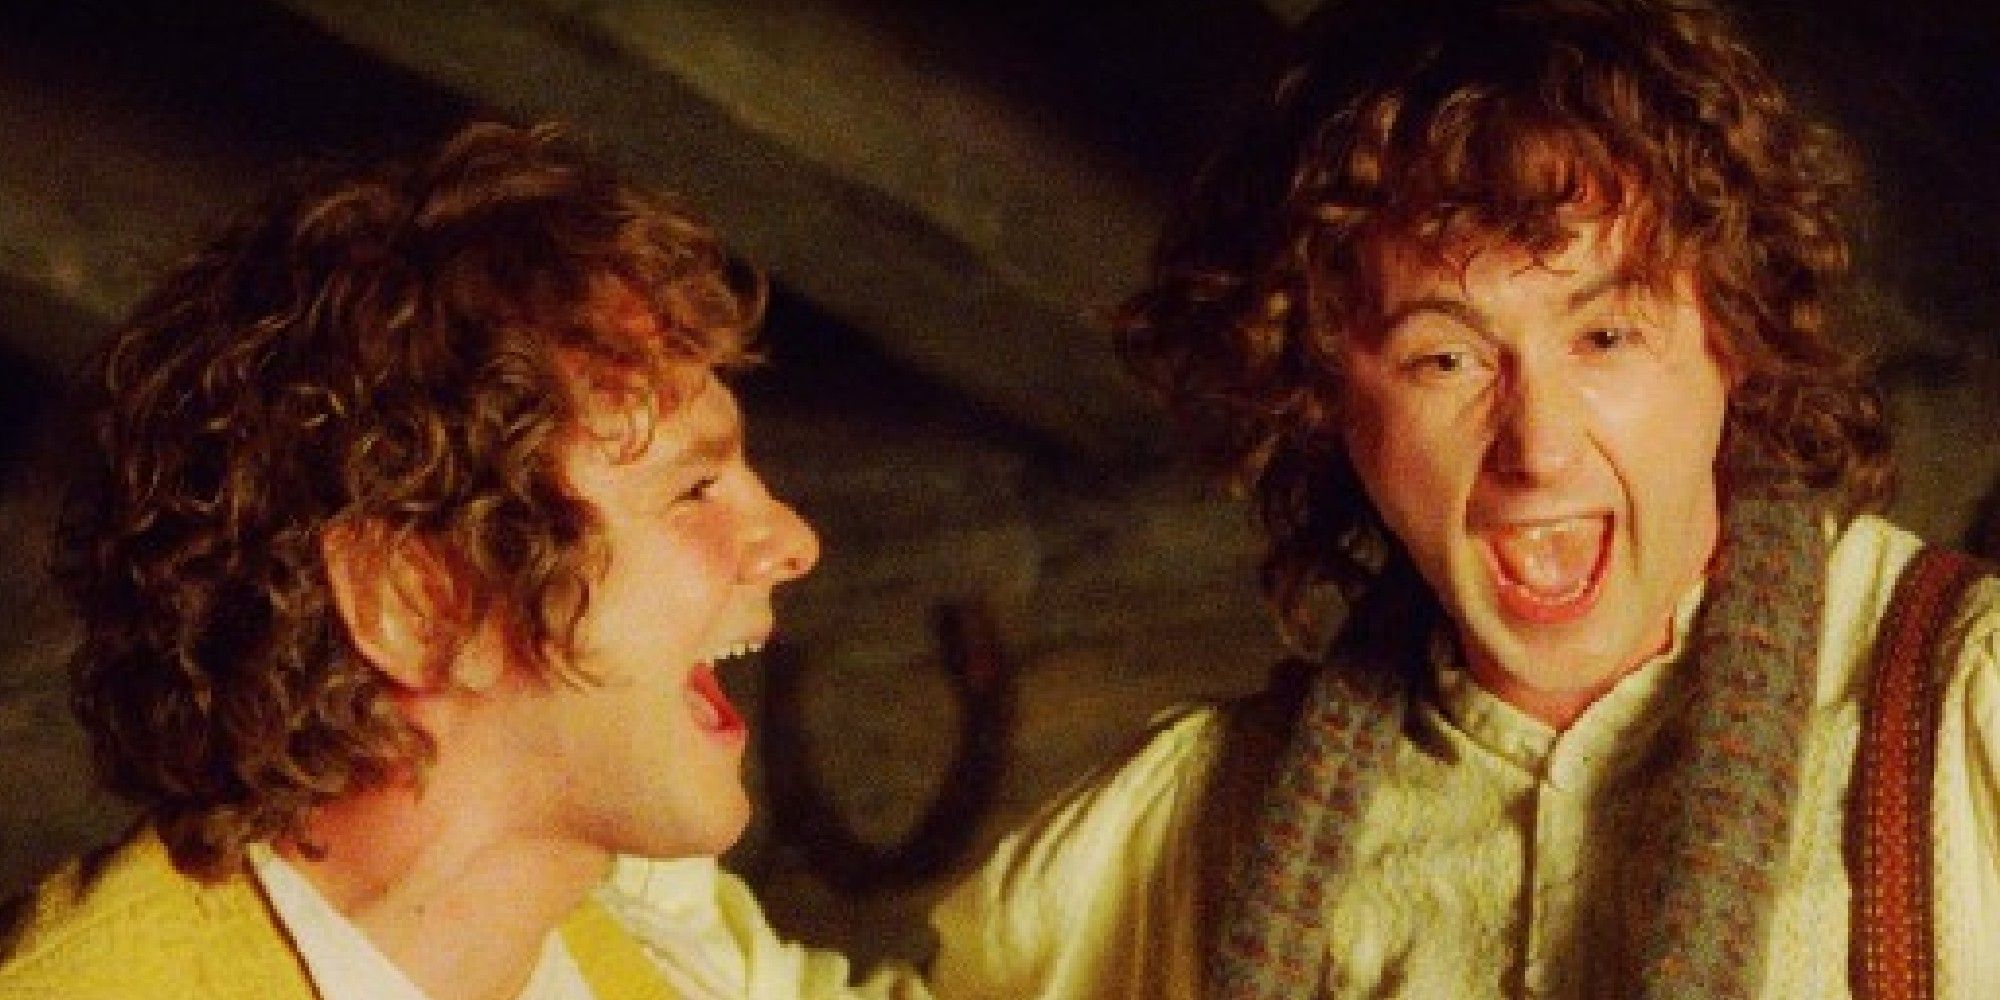 Merry and Pippin laughing in The Lord of the Rings